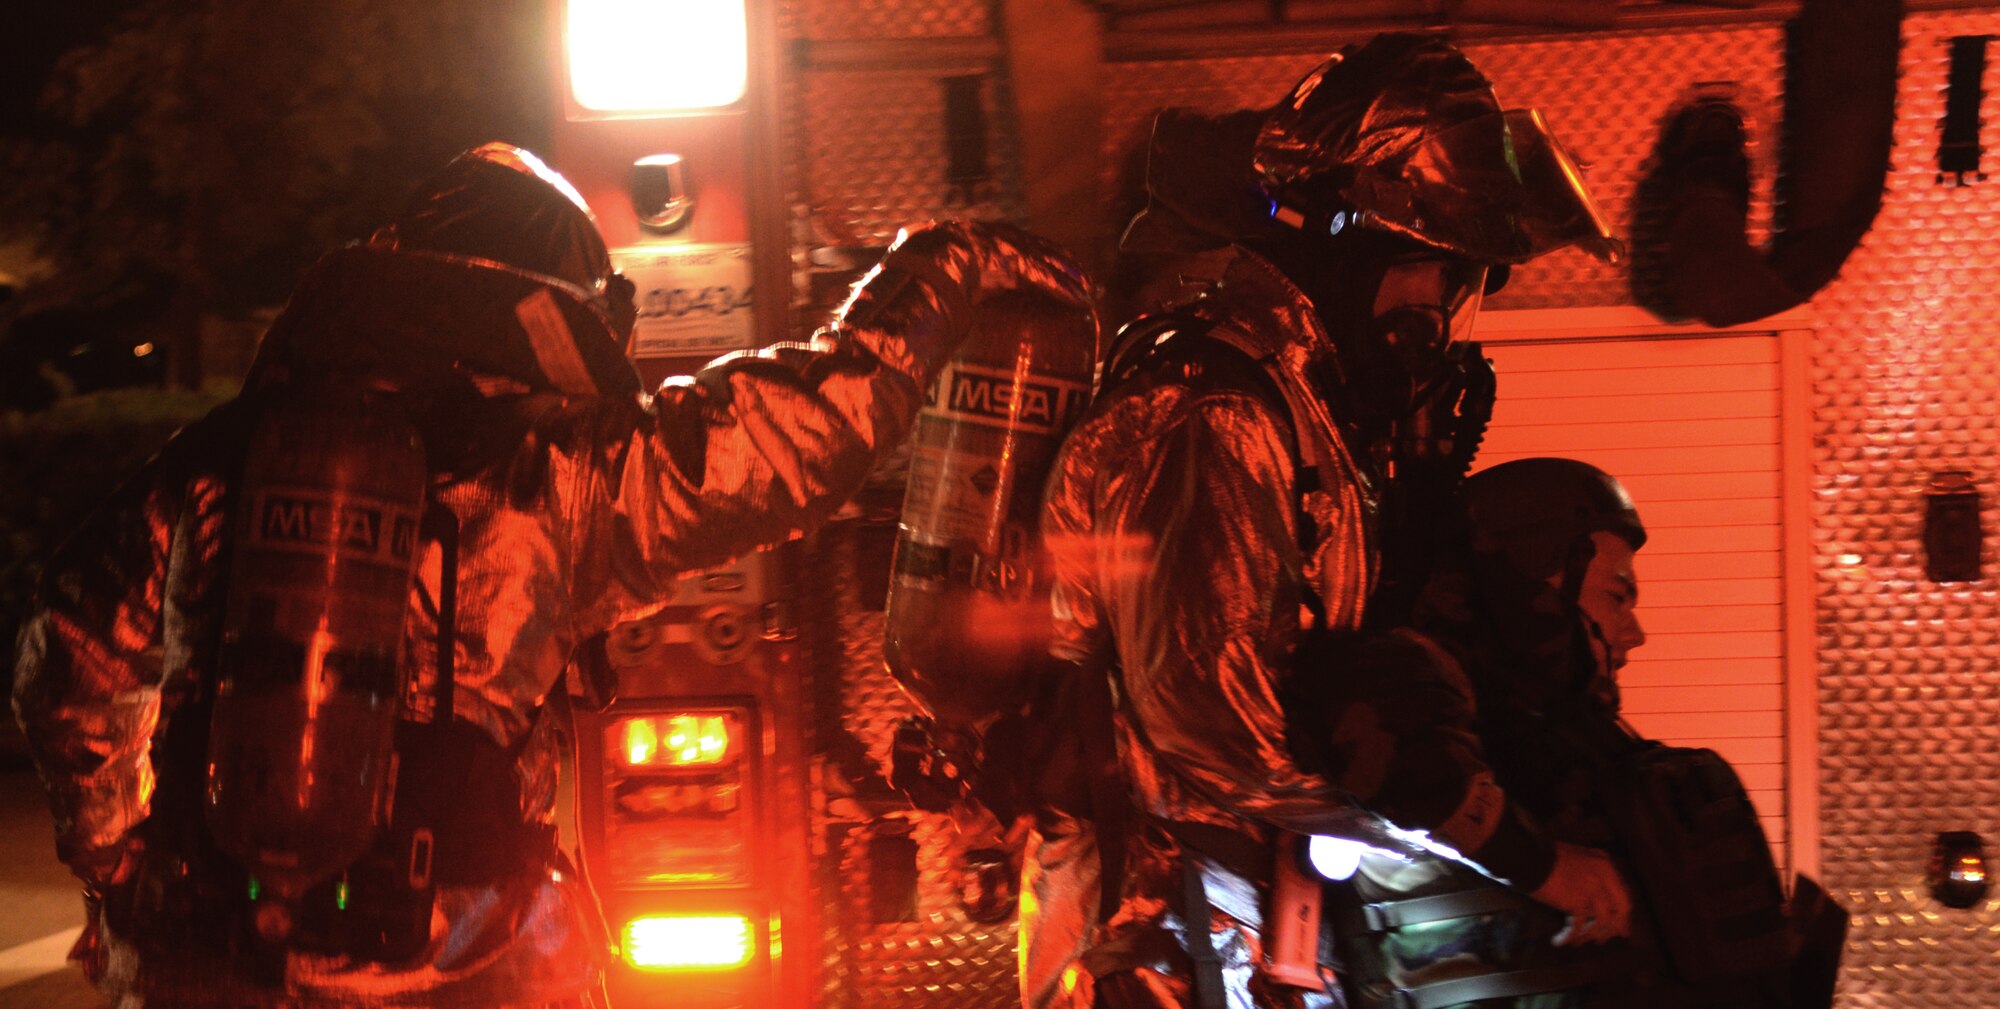 First responders from the 51st Civil Engineer Suqadron remove an exercise casualty during a simulated mass casualty exercise May 12, 2015, at Osan Air Base, Republic of Korea. The simulation was part of Beverly Midnight 15-02, a readiness exercise designed to test the capabilities of Team Osan. (U.S. Air Force photo by Staff Sgt. Benjamin Sutton/Released)  